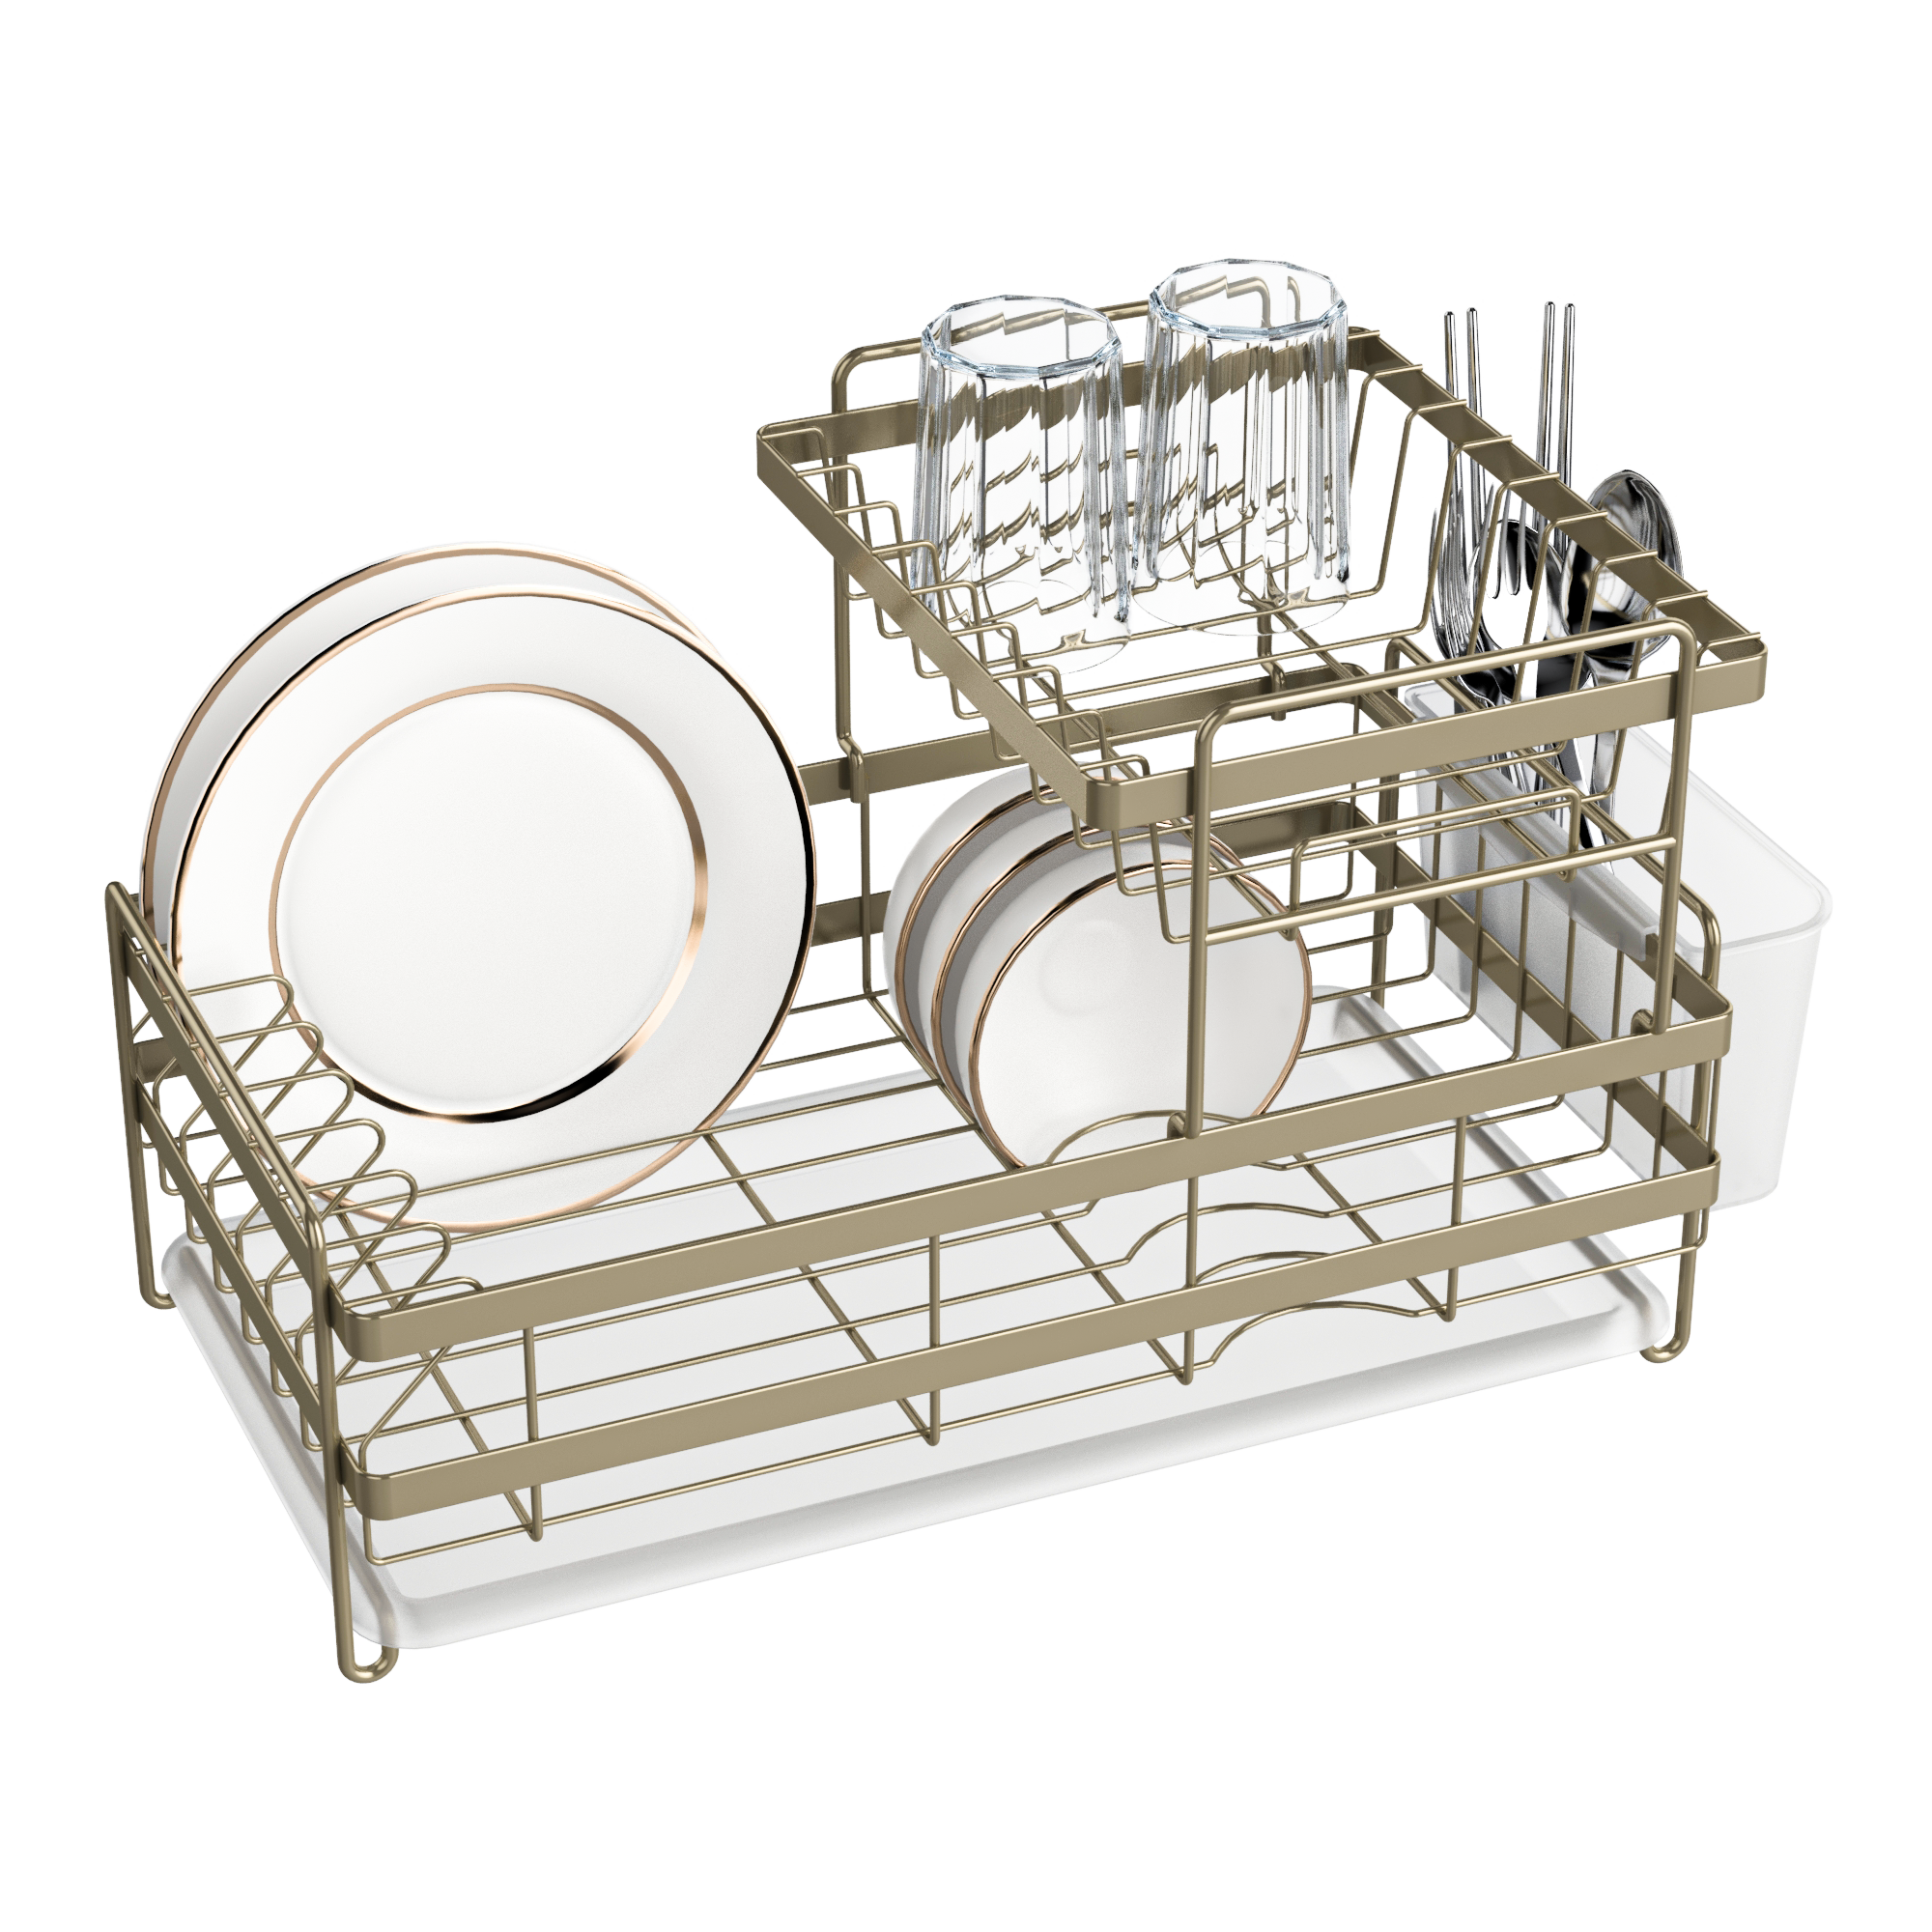 Dish Rack-KD two-tier